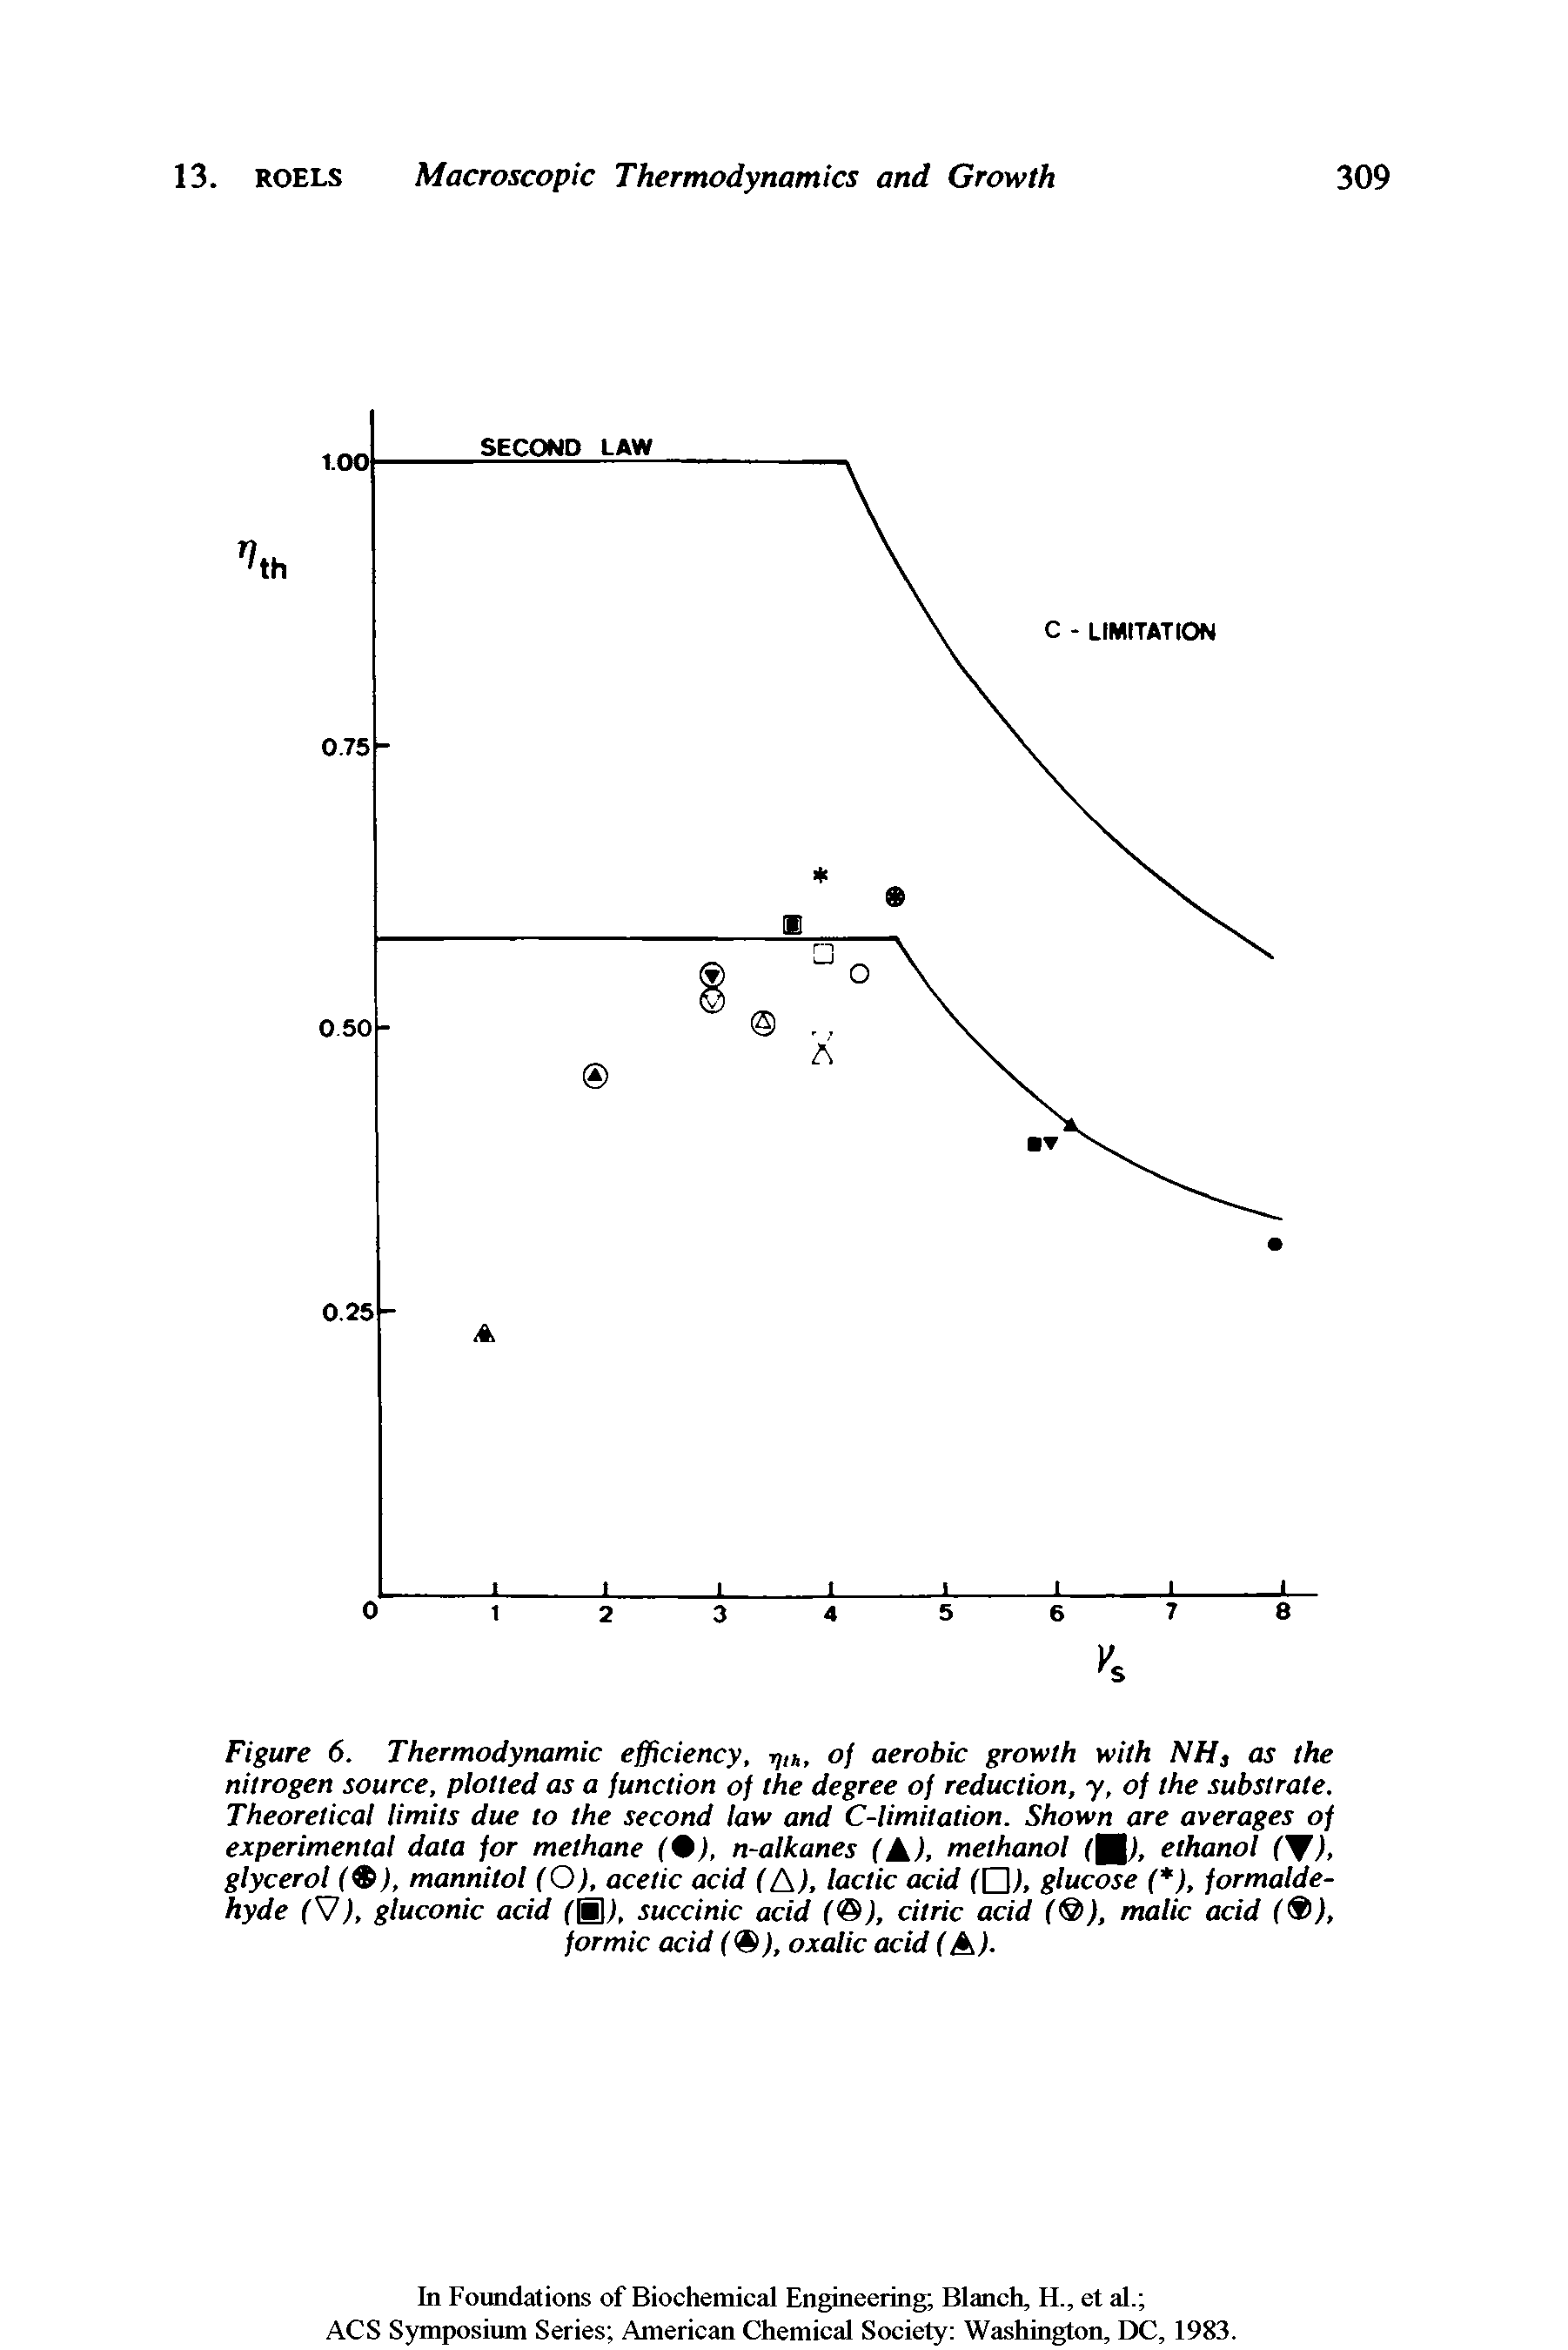 Figure 6. Thermodynamic efficiency, of aerobic growth with NH, as the nitrogen source, plotted as a function of the degree of reduction, y, of the substrate. Theoretical limits due to the second law and C-limitation. Shown are averages of experimental data for methane (%), n-alkanes ( ), methanol (fH), ethanol C ), glycerol (9), mannitol (O), acetic acid (A), lactic acid glucose ( ), formaldehyde (V), gluconic acid ( ), succinic acid ( ), citric acid ( ), malic acid (9), formic acid ( ), oxalic acid (A)-...